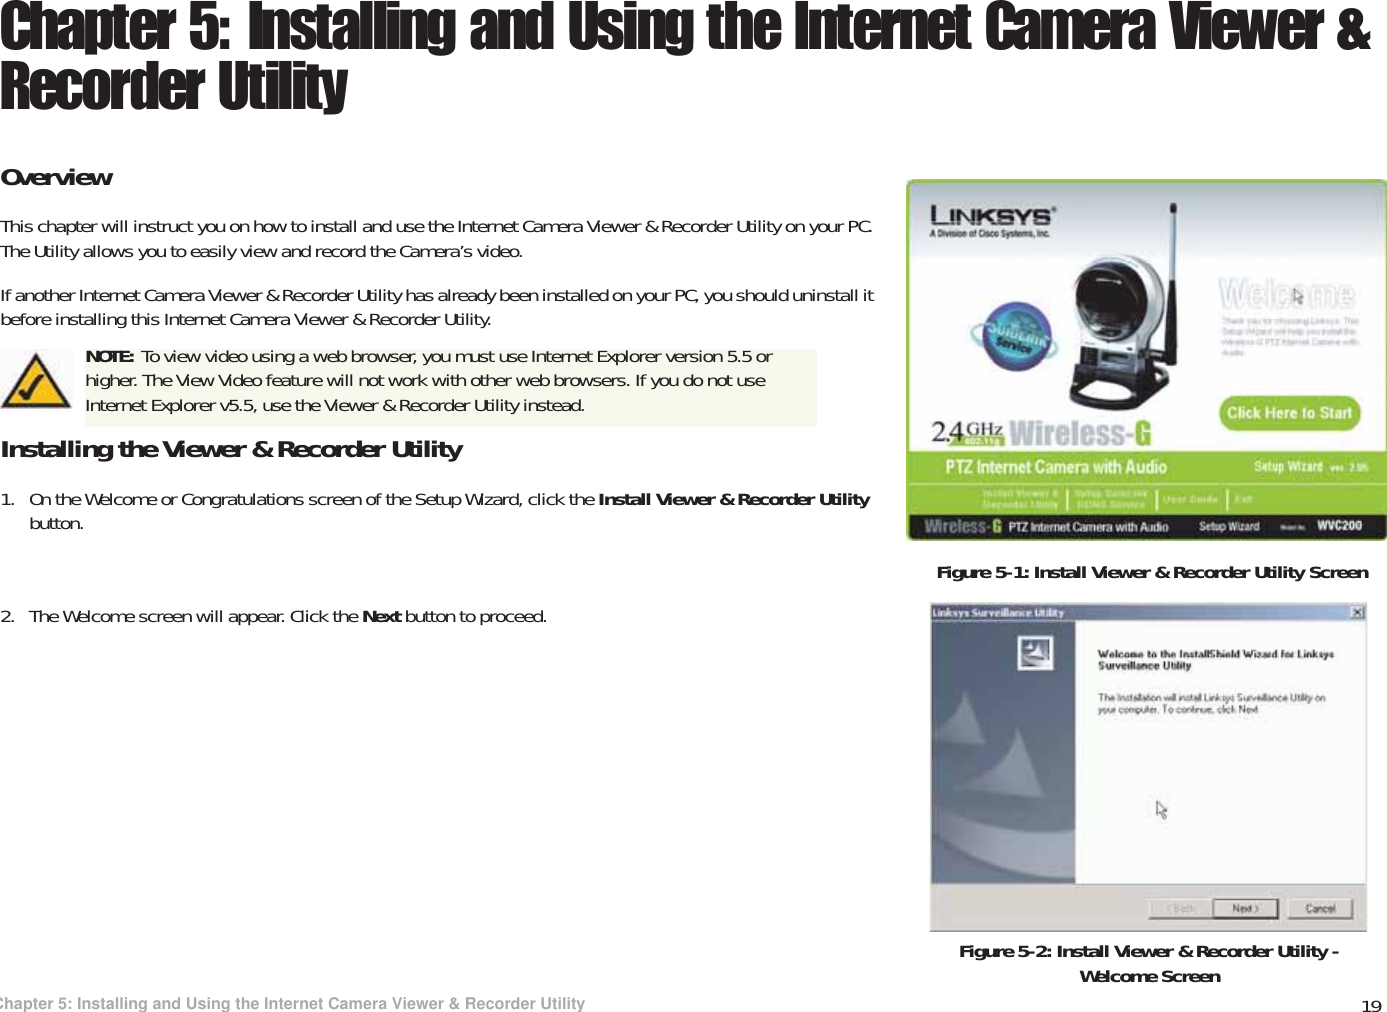 19Chapter 5: Installing and Using the Internet Camera Viewer &amp; Recorder UtilityOverviewWireless-G PTZ Internet Video Camera with AudioChapter 5: Installing and Using the Internet Camera Viewer &amp; Recorder UtilityOverviewThis chapter will instruct you on how to install and use the Internet Camera Viewer &amp; Recorder Utility on your PC. The Utility allows you to easily view and record the Camera’s video.If another Internet Camera Viewer &amp; Recorder Utility has already been installed on your PC, you should uninstall it before installing this Internet Camera Viewer &amp; Recorder Utility.Installing the Viewer &amp; Recorder Utility1. On the Welcome or Congratulations screen of the Setup Wizard, click the Install Viewer &amp; Recorder Utility button.2. The Welcome screen will appear. Click the Next button to proceed.Figure 5-1: Install Viewer &amp; Recorder Utility ScreenFigure 5-2: Install Viewer &amp; Recorder Utility - Welcome ScreenNOTE: To view video using a web browser, you must use Internet Explorer version 5.5 or higher. The View Video feature will not work with other web browsers. If you do not use Internet Explorer v5.5, use the Viewer &amp; Recorder Utility instead.